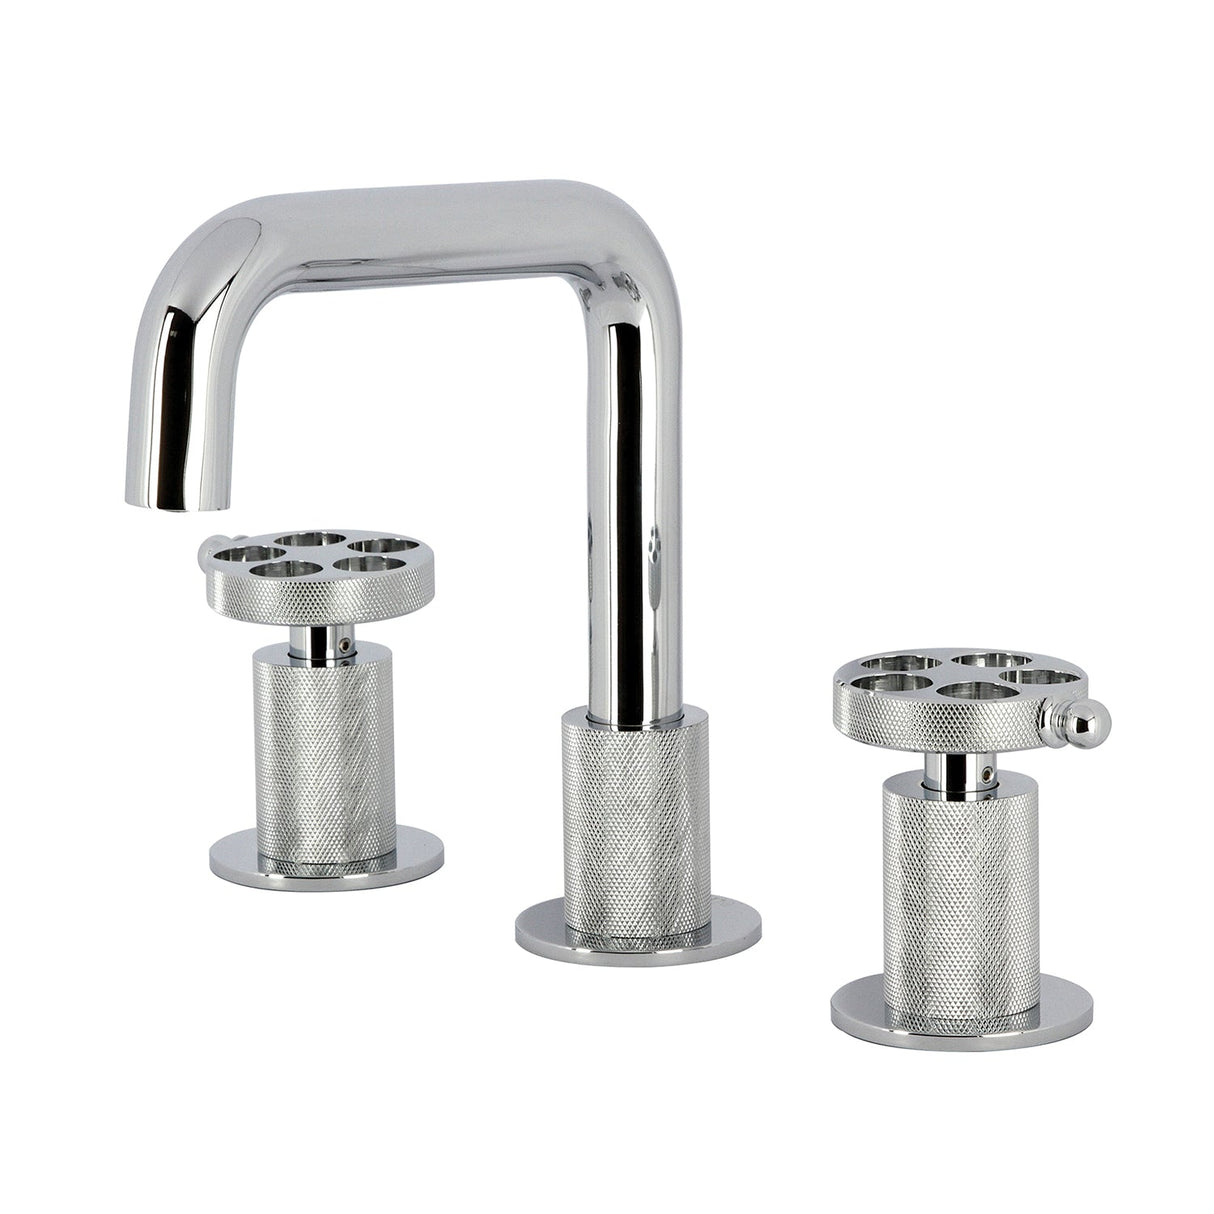 Wendell KS1411RKZ Two-Handle 3-Hole Deck Mount Widespread Bathroom Faucet with Knurled Handle and Push Pop-Up Drain, Polished Chrome